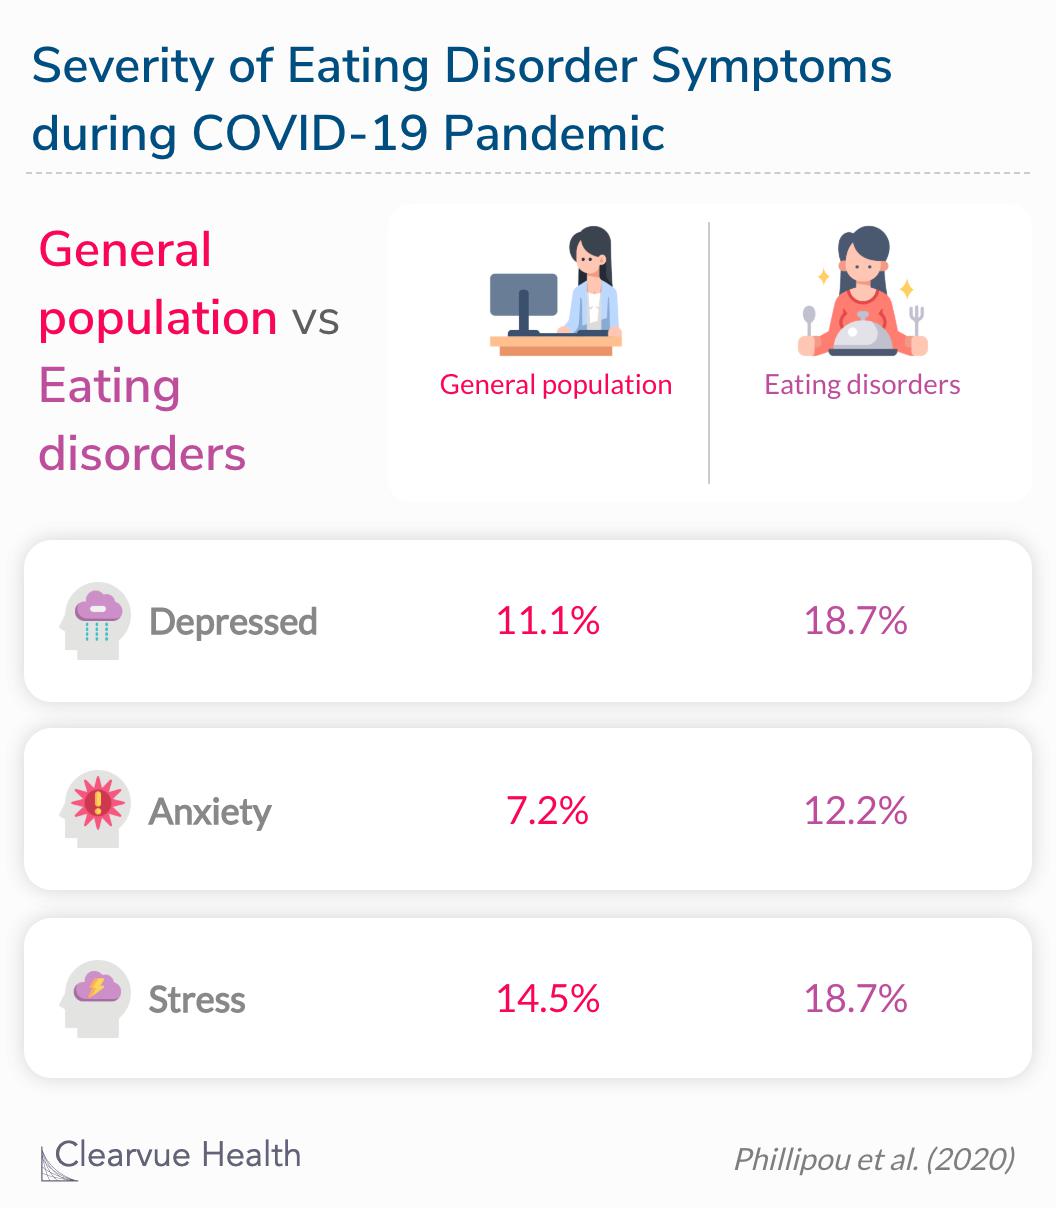 The majority of respondents with eating disorders showed moderate to extremely severe levels of depression, anxiety, and stress compared to the general population. 